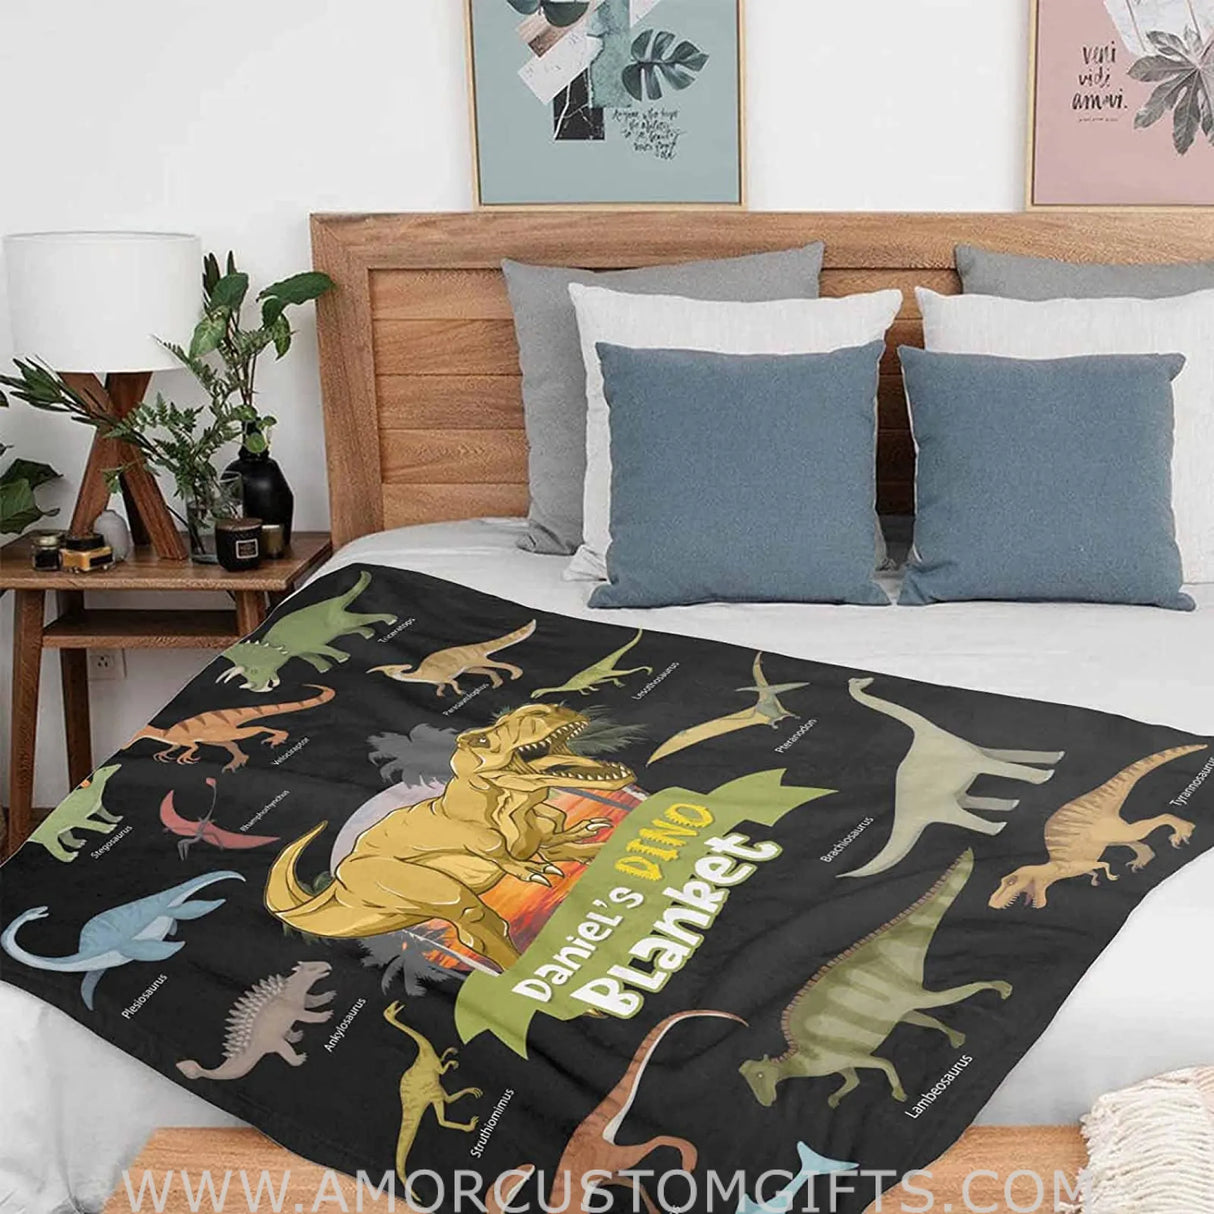 Blankets USA MADE Custom Name Blankets for Baby Boys Girls - Baby Blankets with Dinosaur Design for Kids - Throw Blanket with Cute Animal